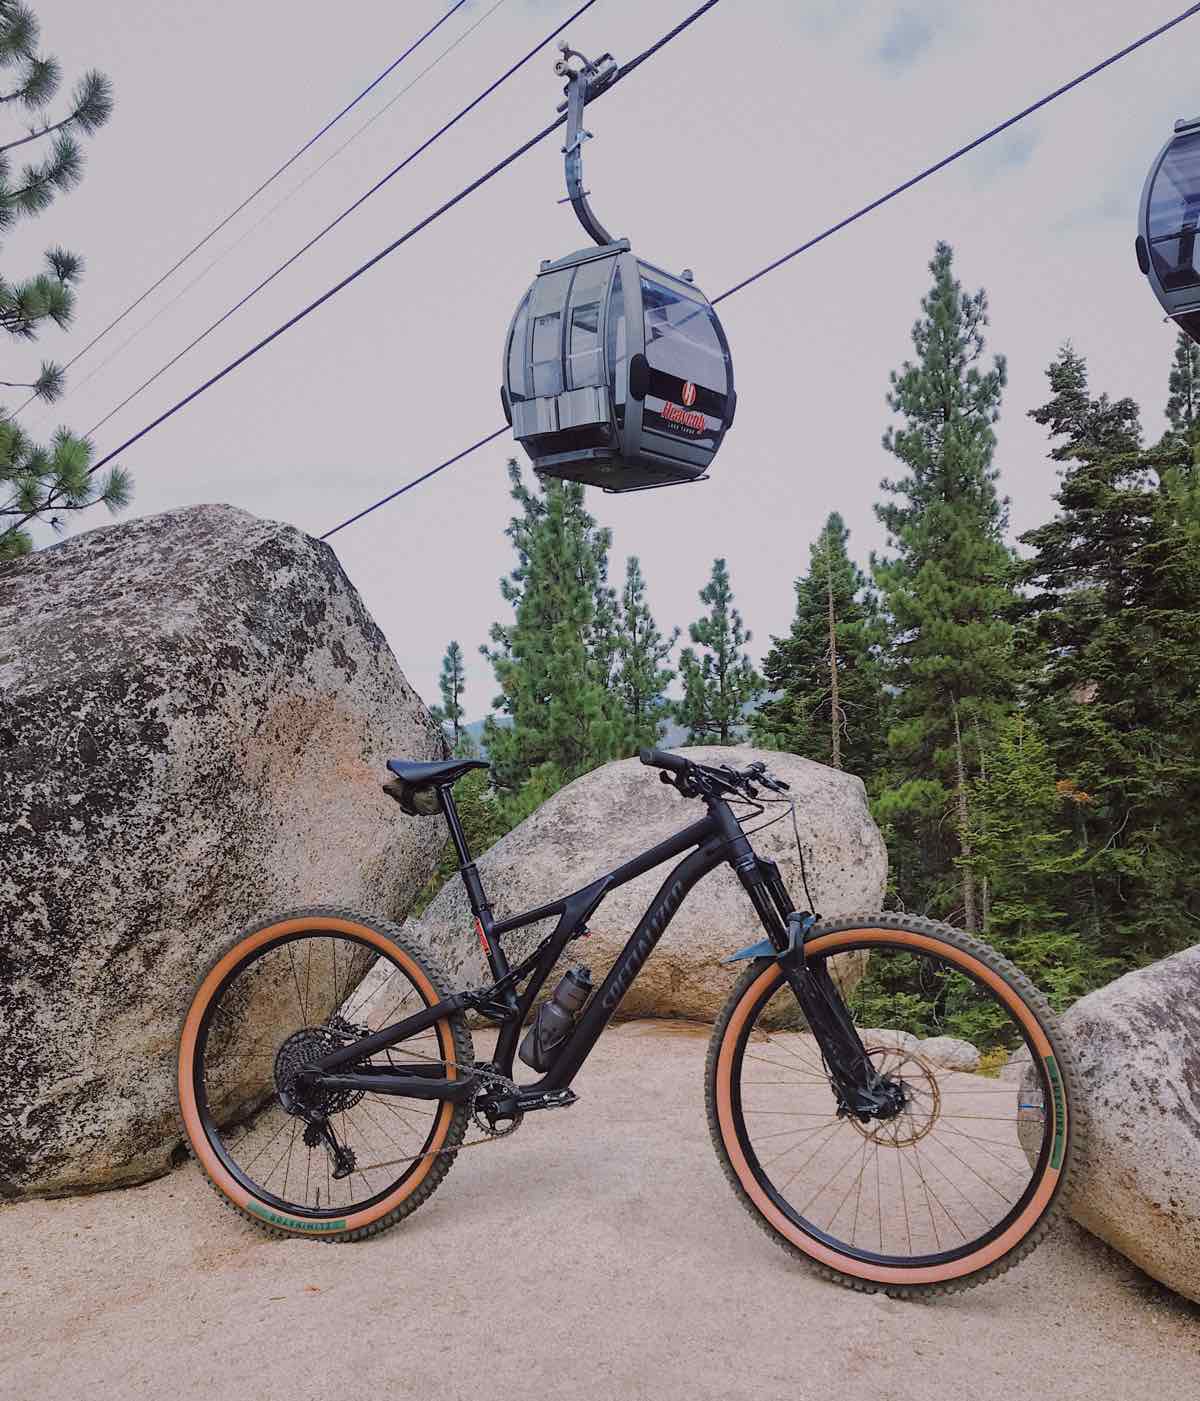 bikerumor pic of the day a mountain bike is near some lake boulders underneath a gondola surrounded by large pine trees.